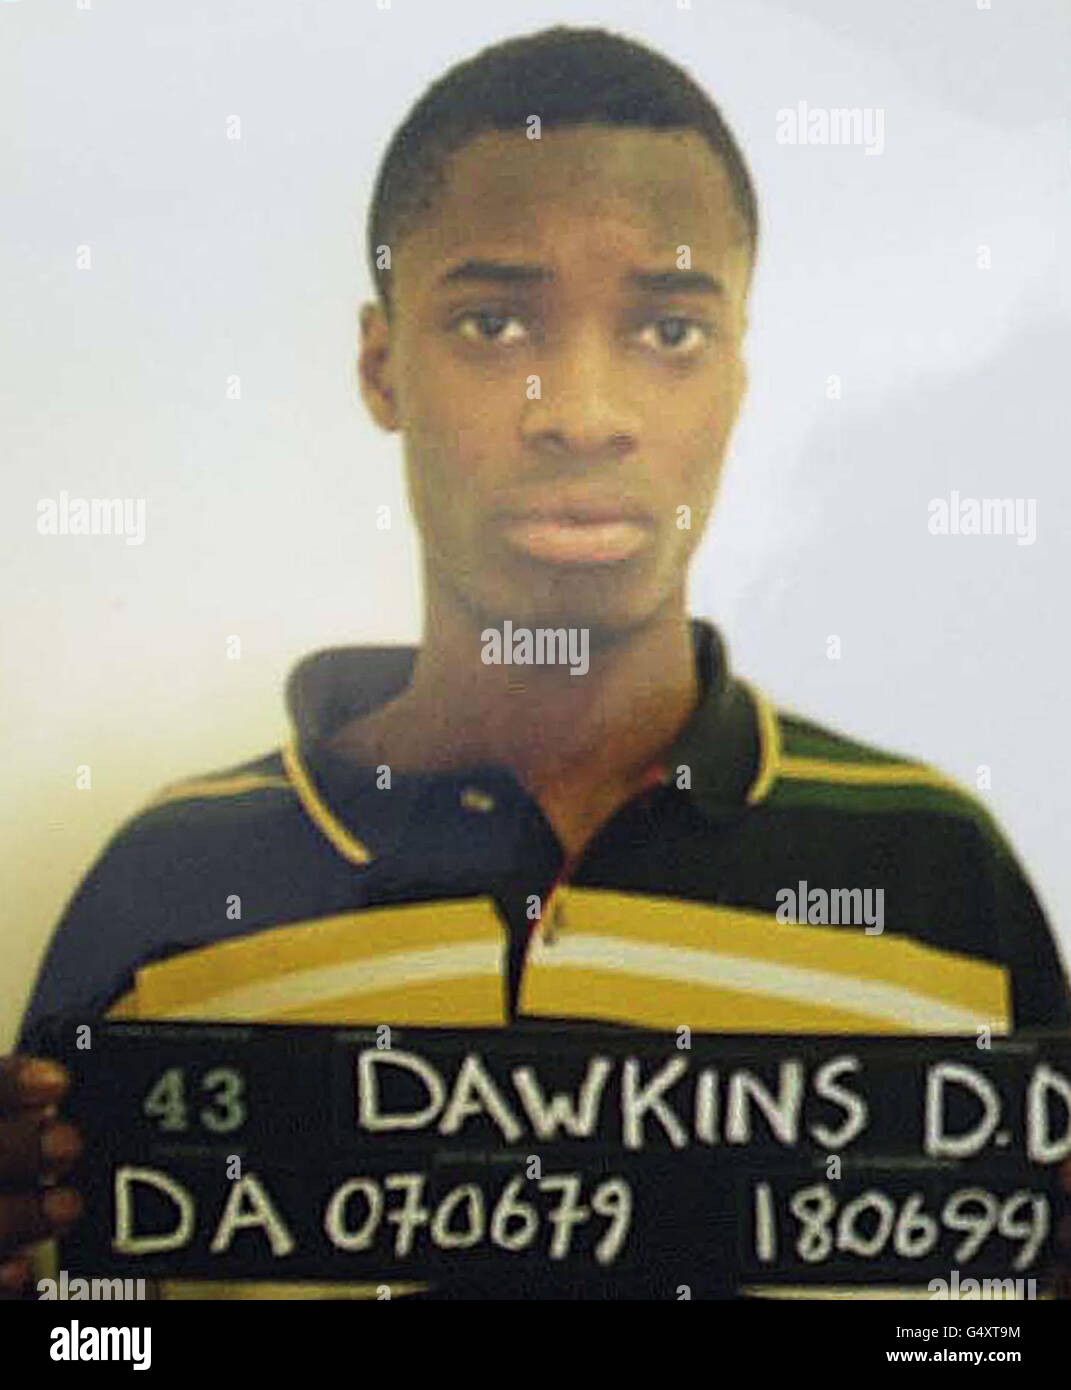 Dwayne Dawkins, 20, from Milton Keynes, who was one of four people convicted at Luton Crown Court of the killing of Jonathan Coles, 18, who was beaten, robbed, kidnapped and left to drown in a river following a night club brawl. * The jury took 11-and-a-half hours of deliberations to convict Dawkins, Darren Matthews, 17, of Neath Hill, Milton Keynes, and 21-year-old Brian Alleyne, of North Seventh Street, Milton Keynes, of Jonathan s murder. Jason Canepe, 20, of Great Denton, Eaglestone, Milton Keynes, was cleared of murder by the jury, but had pleaded guilty during the trial to manslaughter. Stock Photo